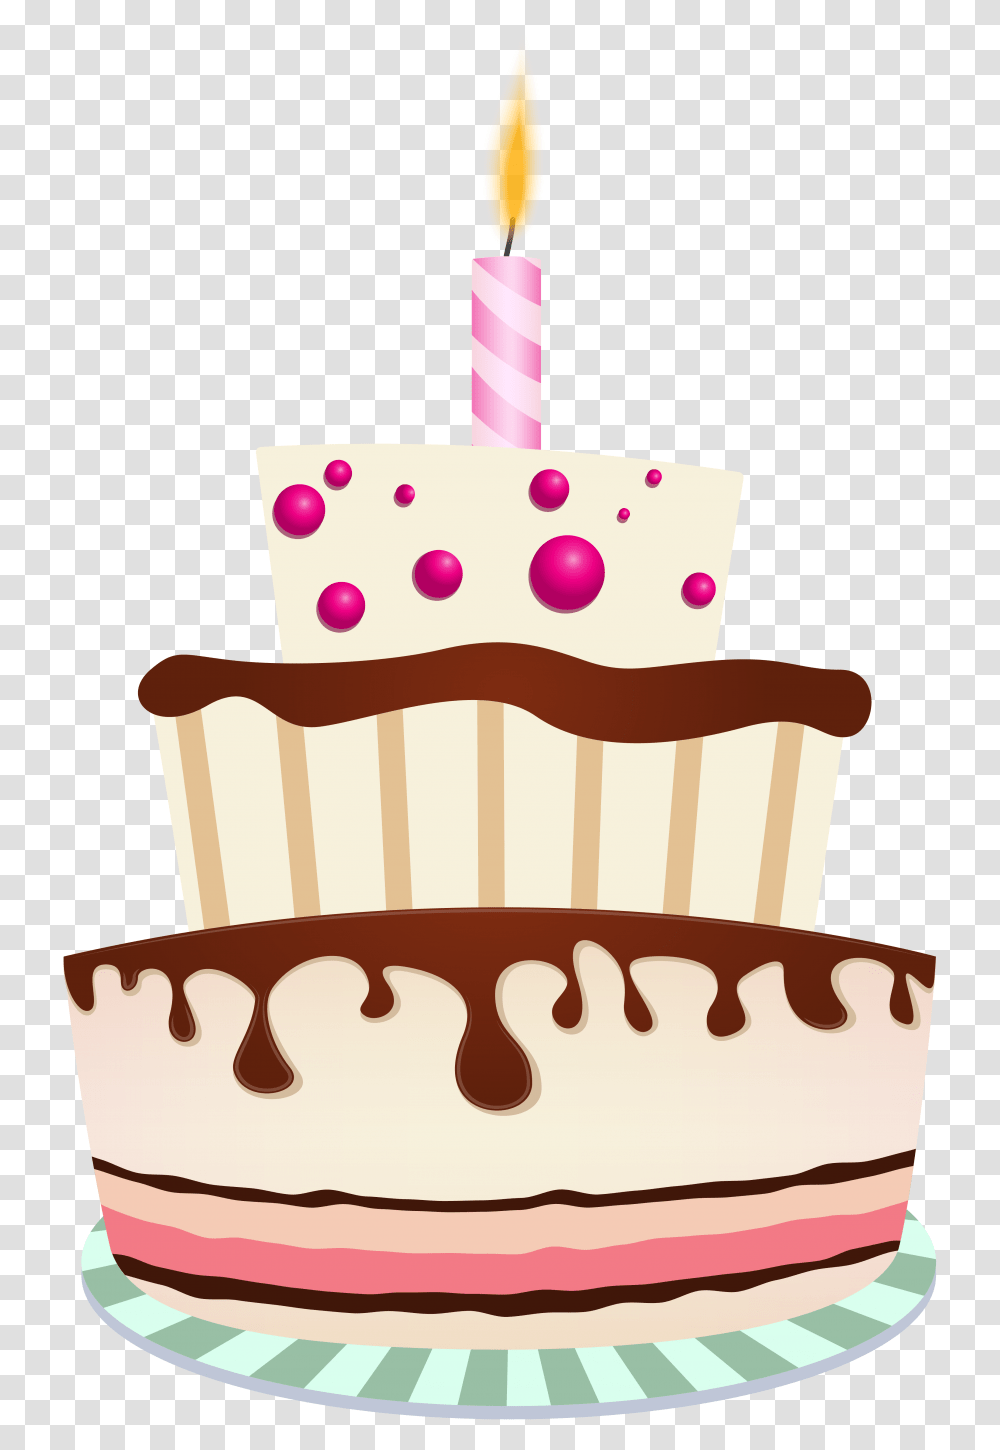 Birthday Cakes Cake With One Candle Clipart Background Birthday Cake, Cupcake, Cream, Dessert, Food Transparent Png